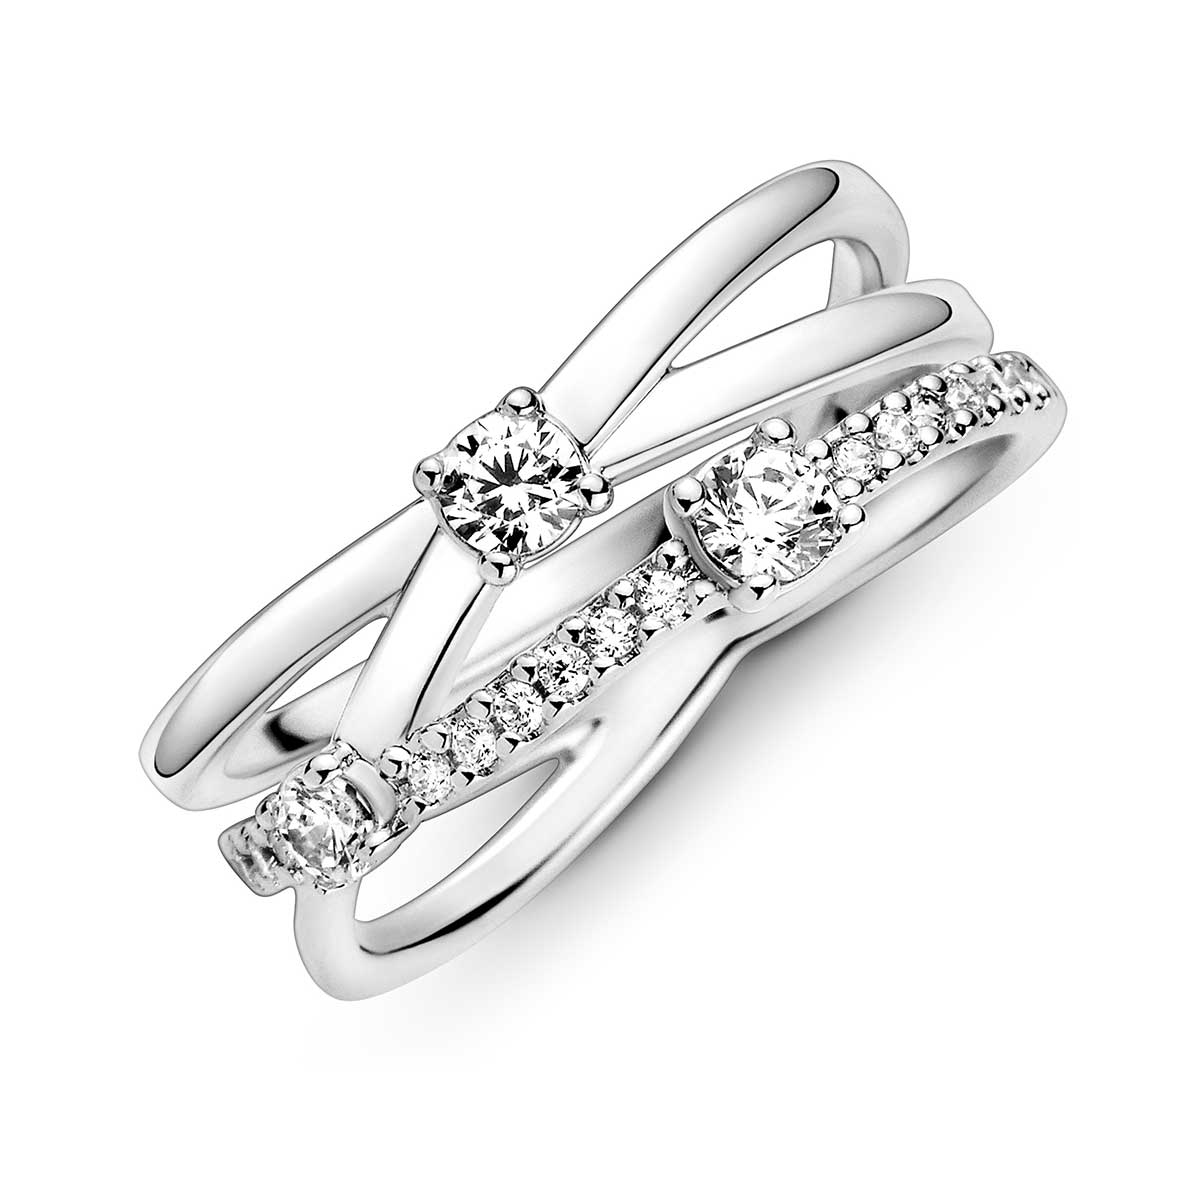 Sparkling Triple Band Ring